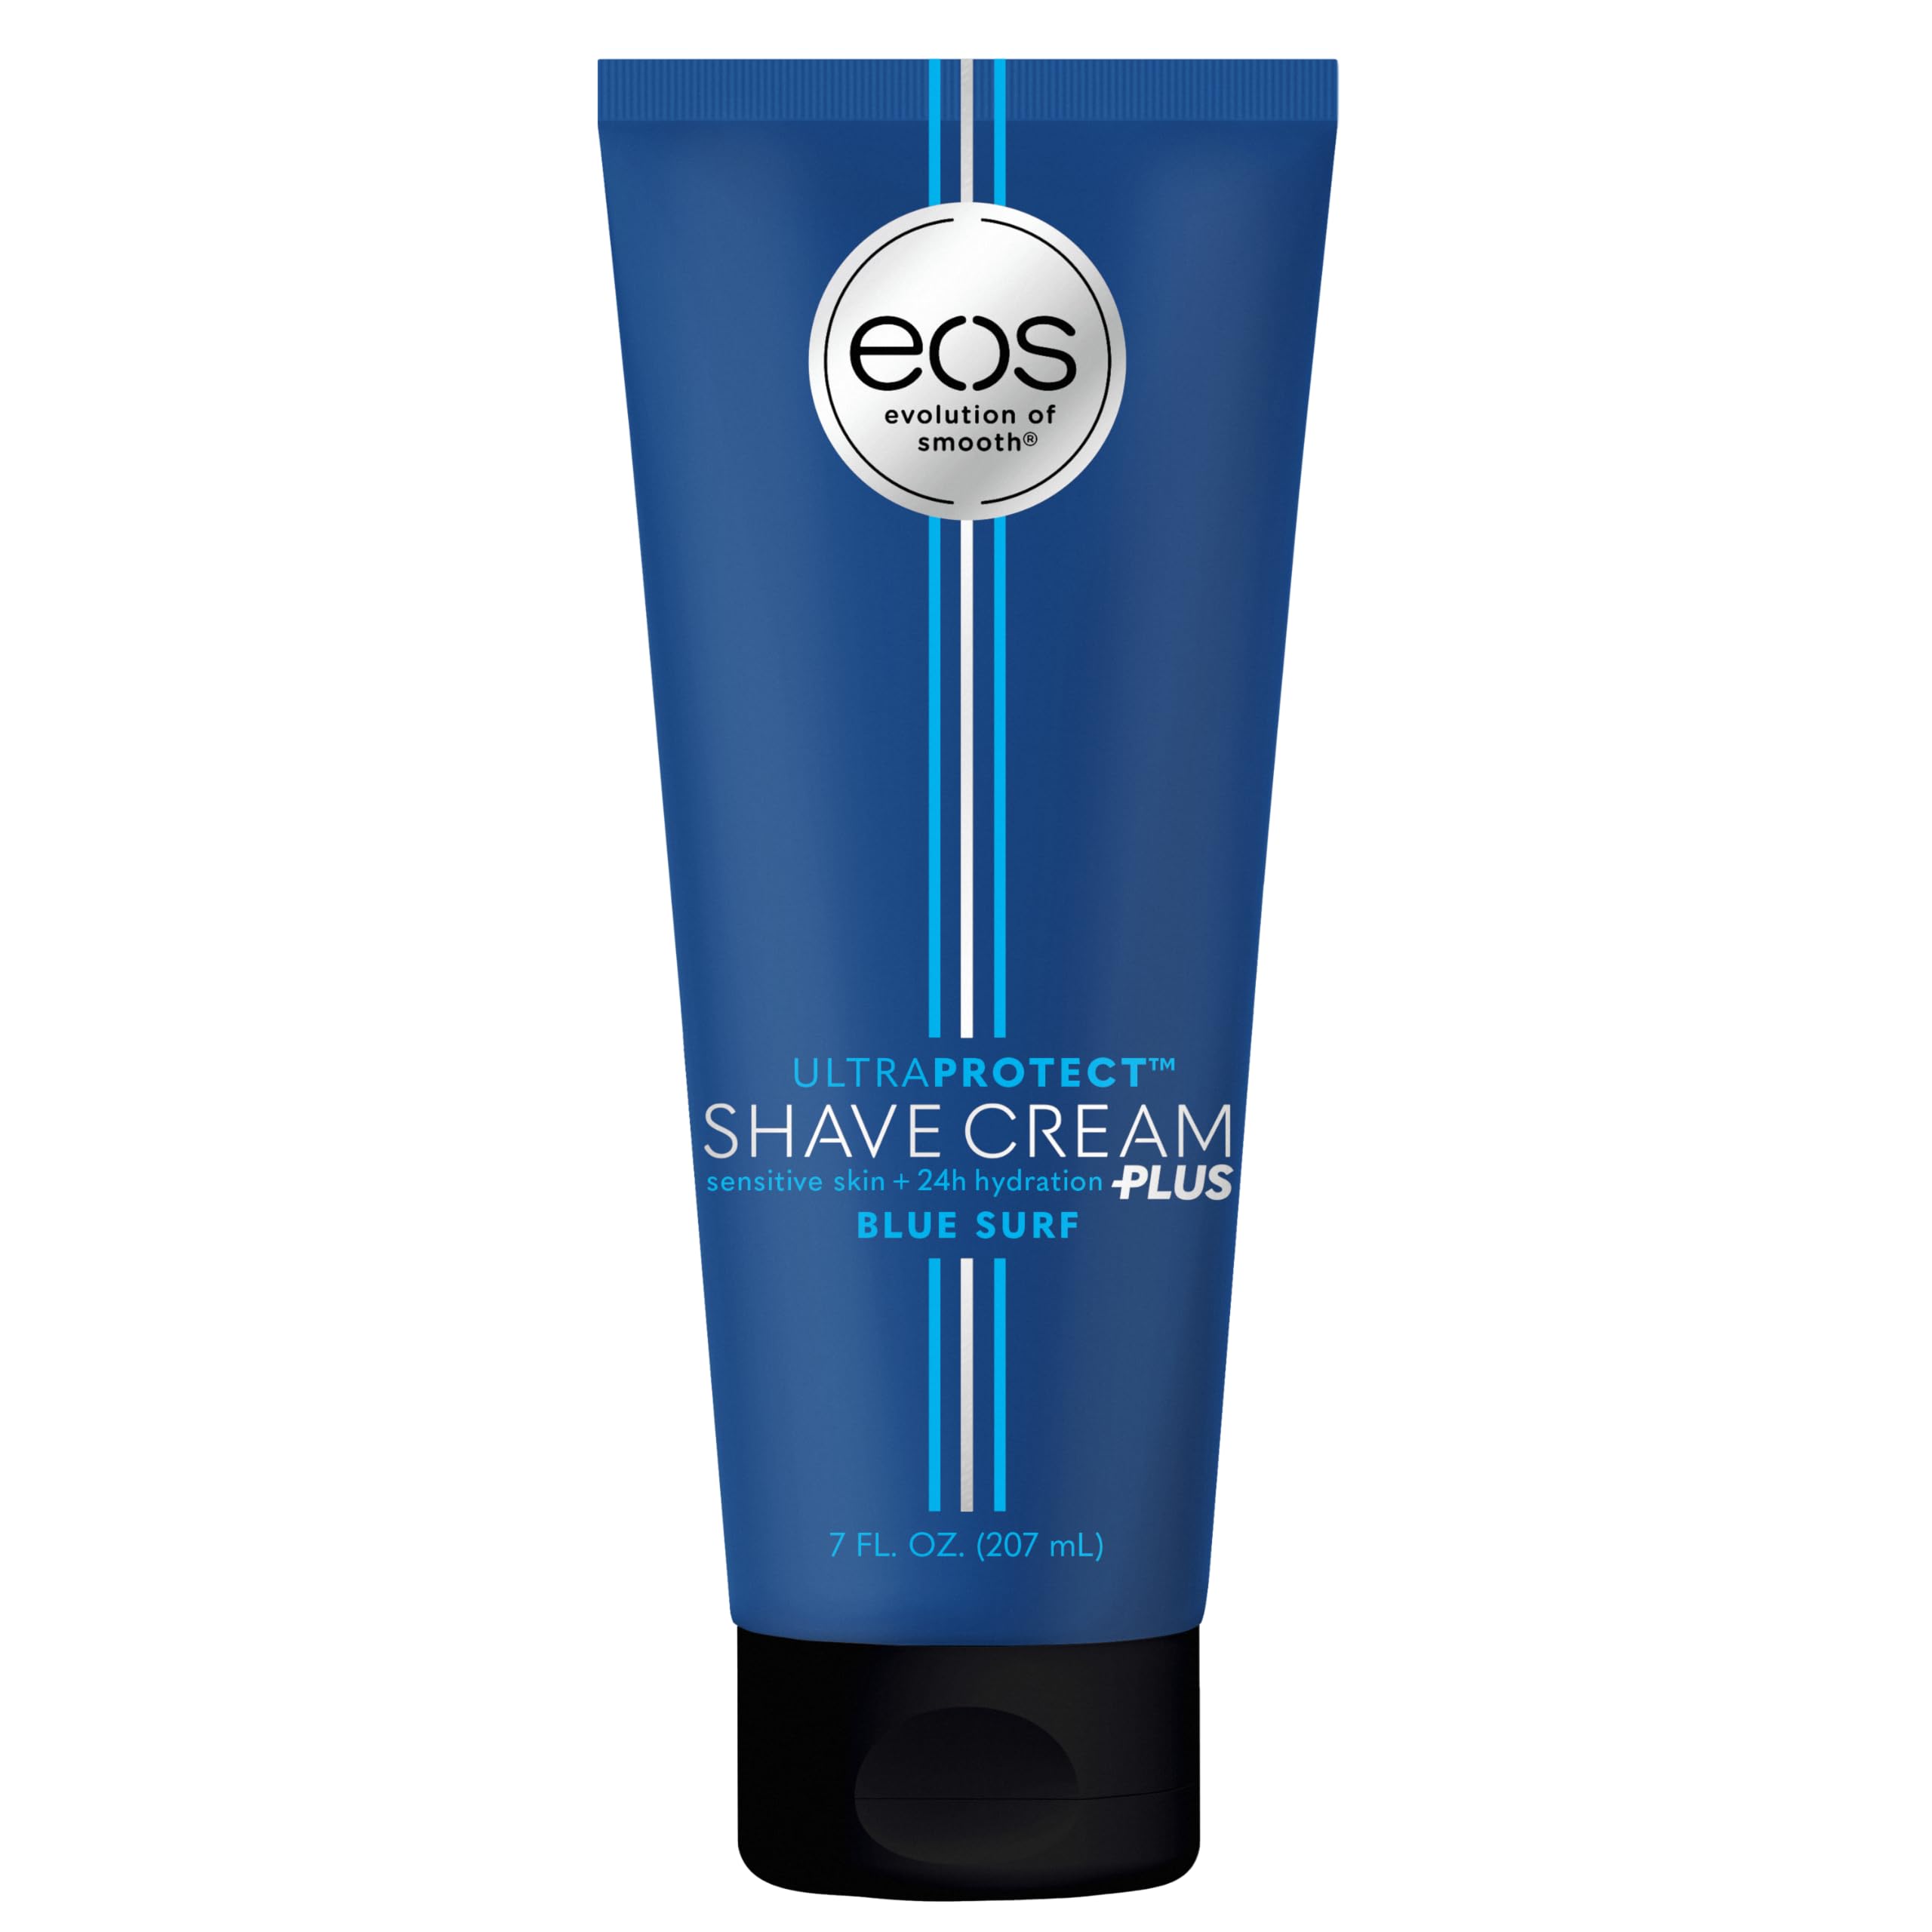 7-Oz eos UltraProtect Men’s Shave Cream (Blue Surf, 24-Hour Hydration, Non-Foaming Formula) $3.58 w/ S&S + Free Shipping w/ Prime or on $35+